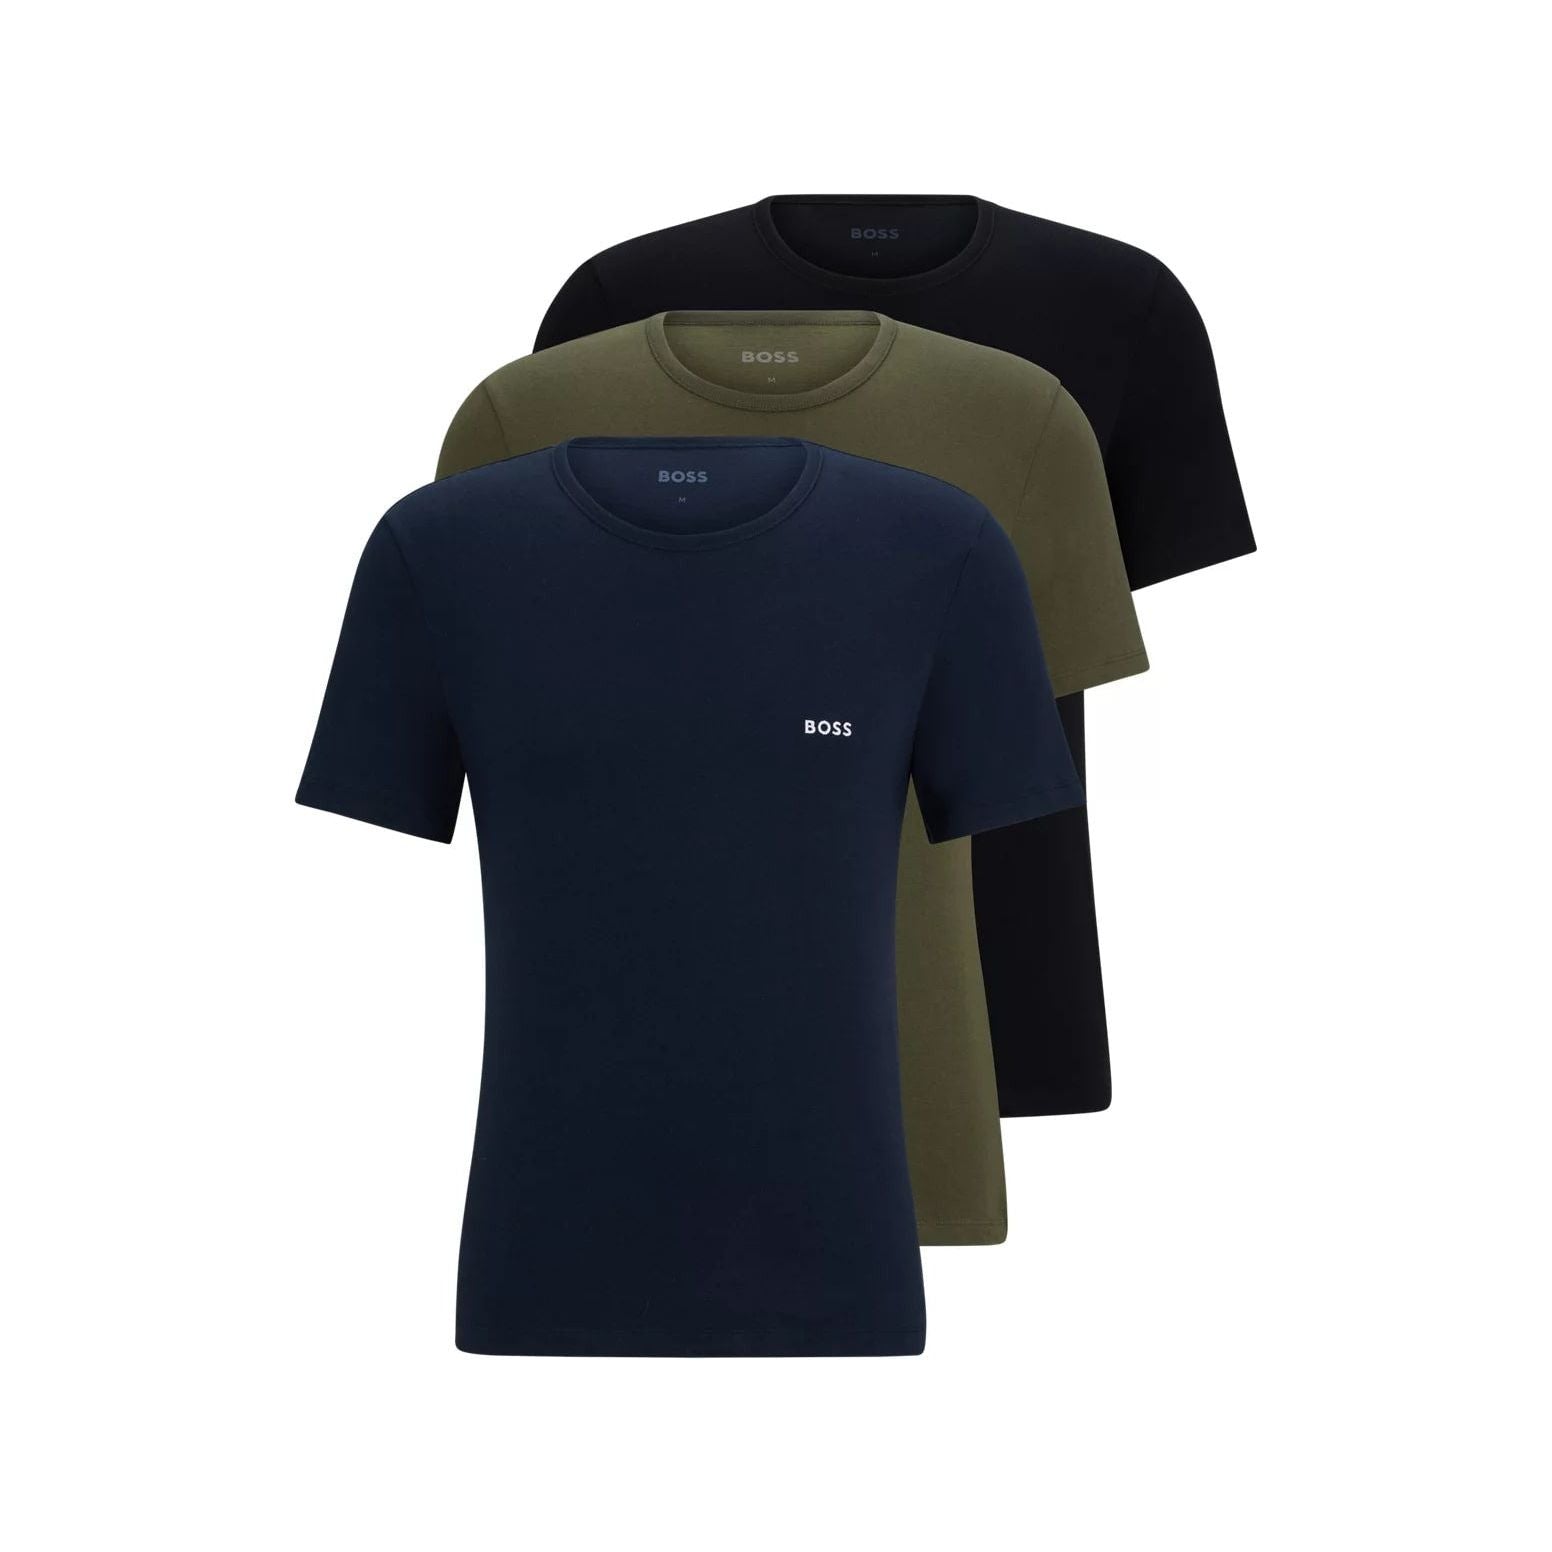 BOSS BRANDED COTTON JERSEY UNDERSHIRTS IN A PACK OF THREE - Yooto